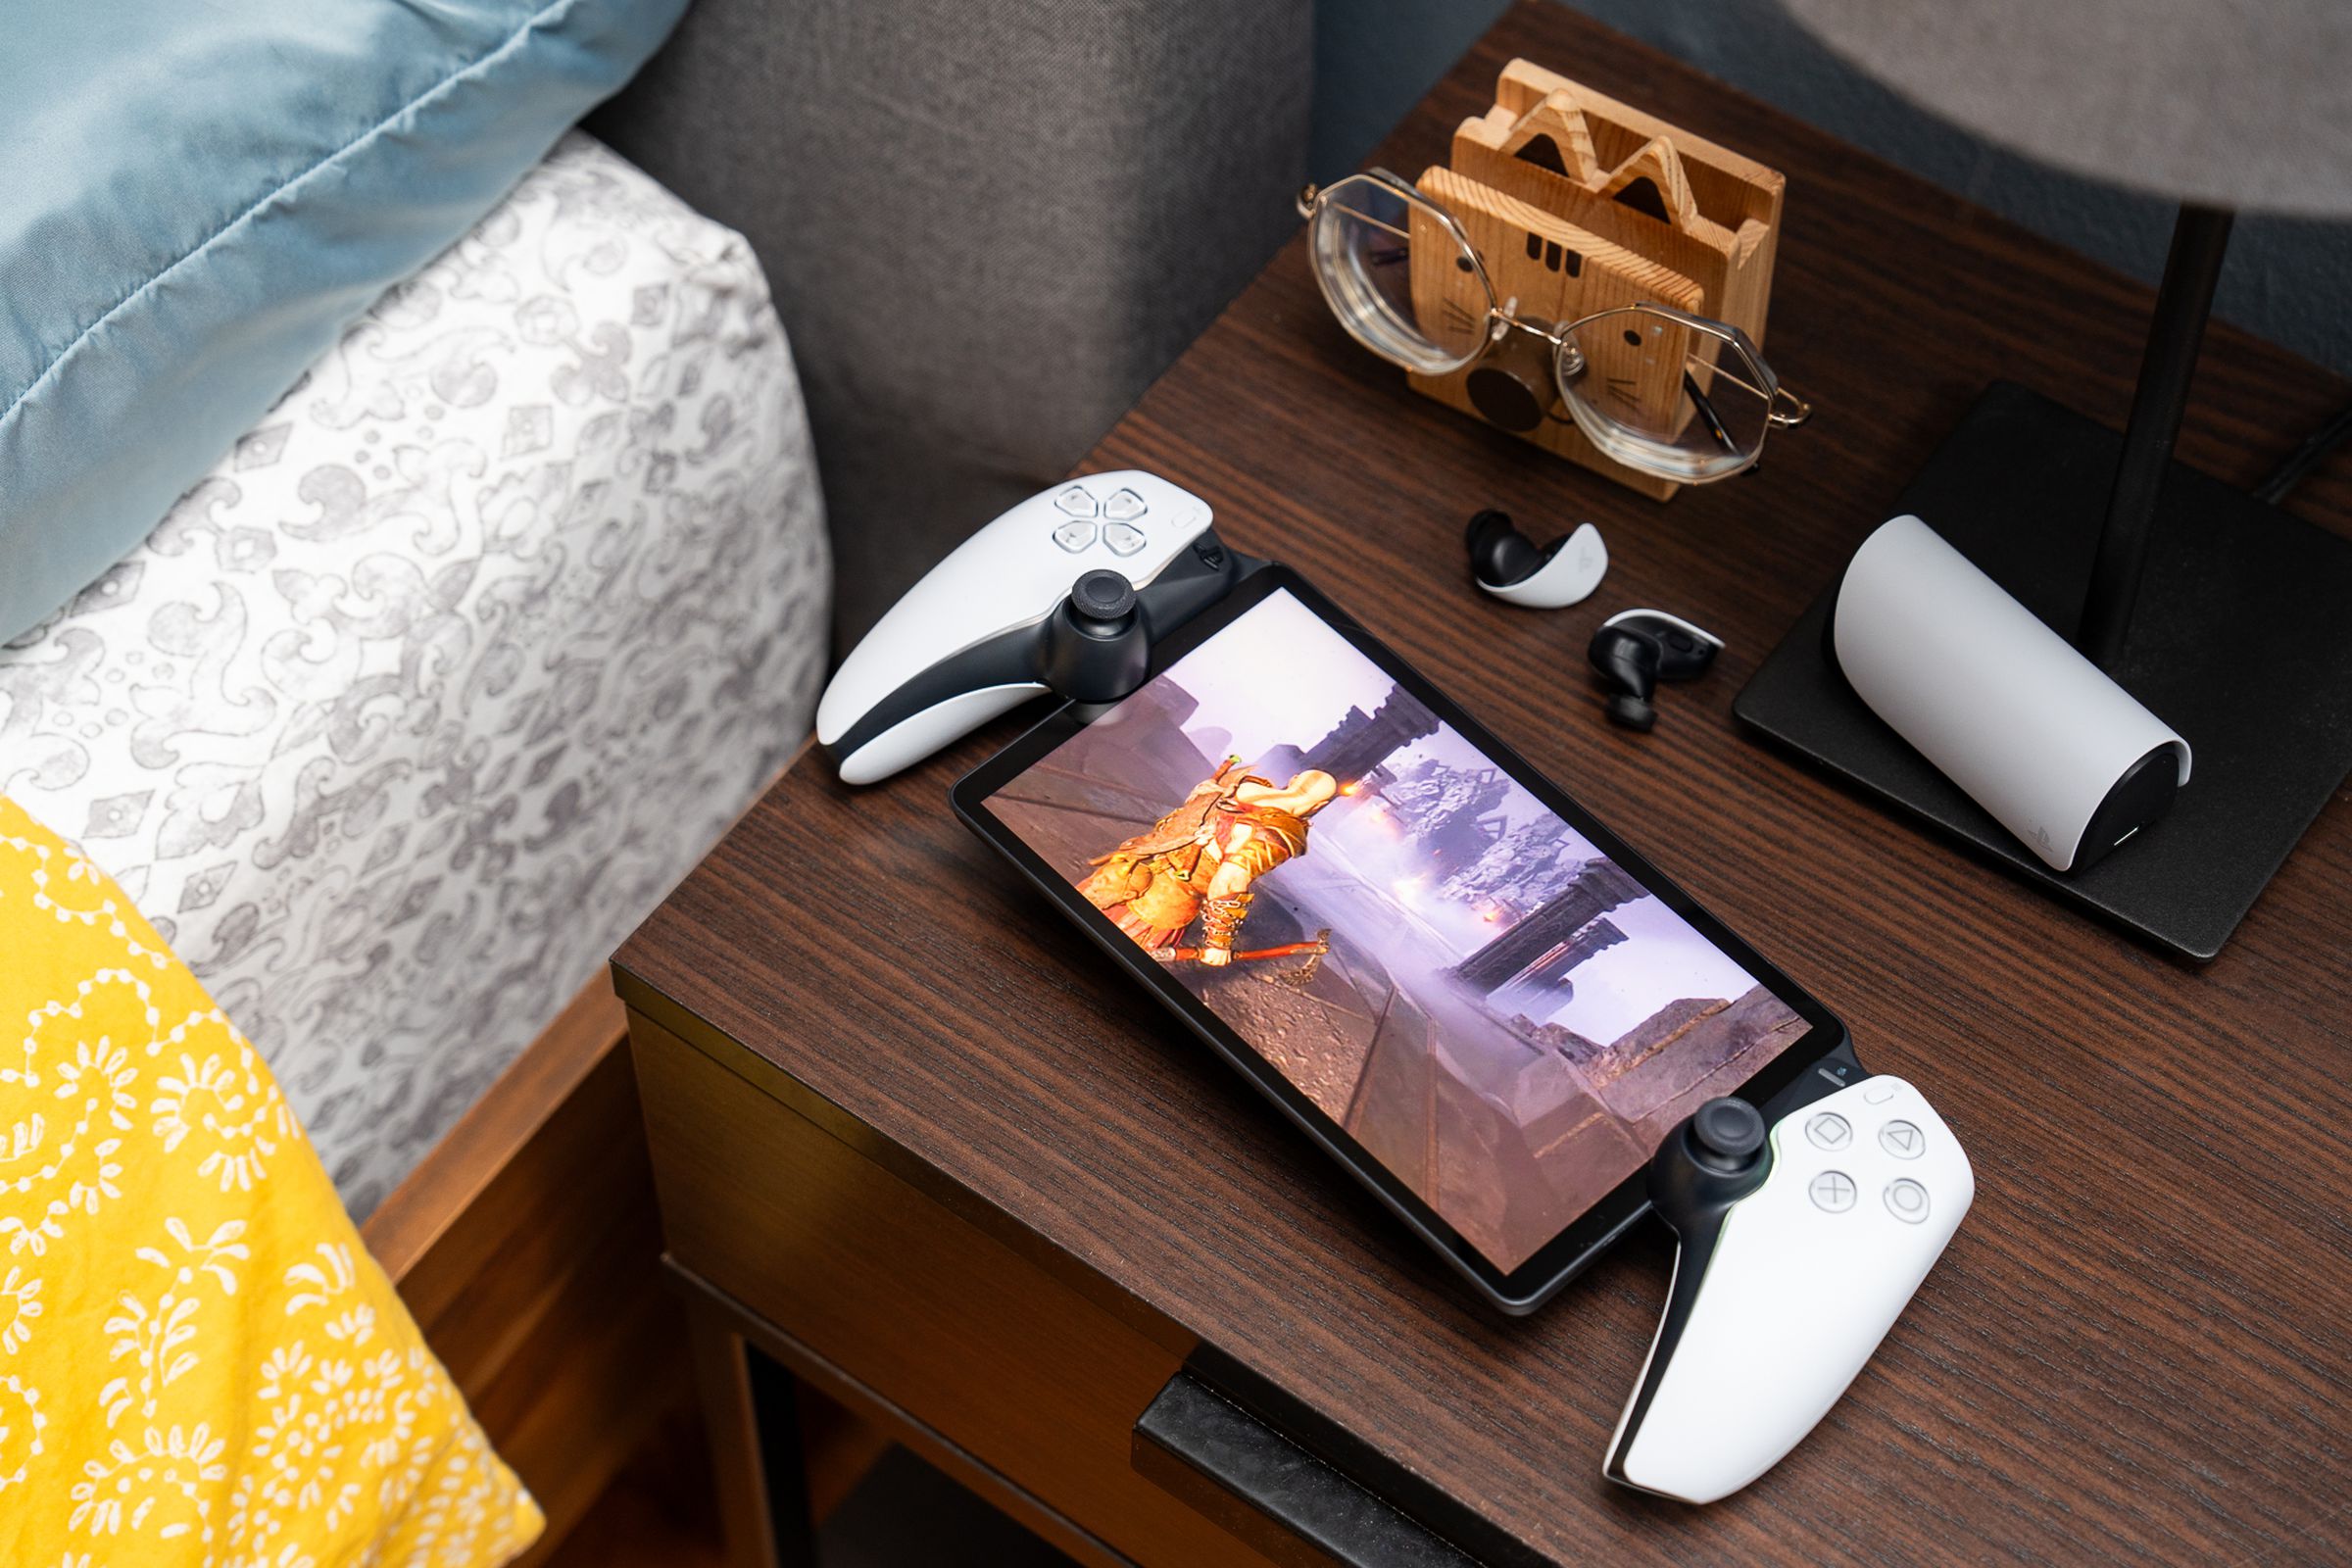 The PlayStation Portal sitting on a bedside table with a pair of earbuds. The handheld gaming device is streaming God of War: Ragnar?k off a PlayStation 5.